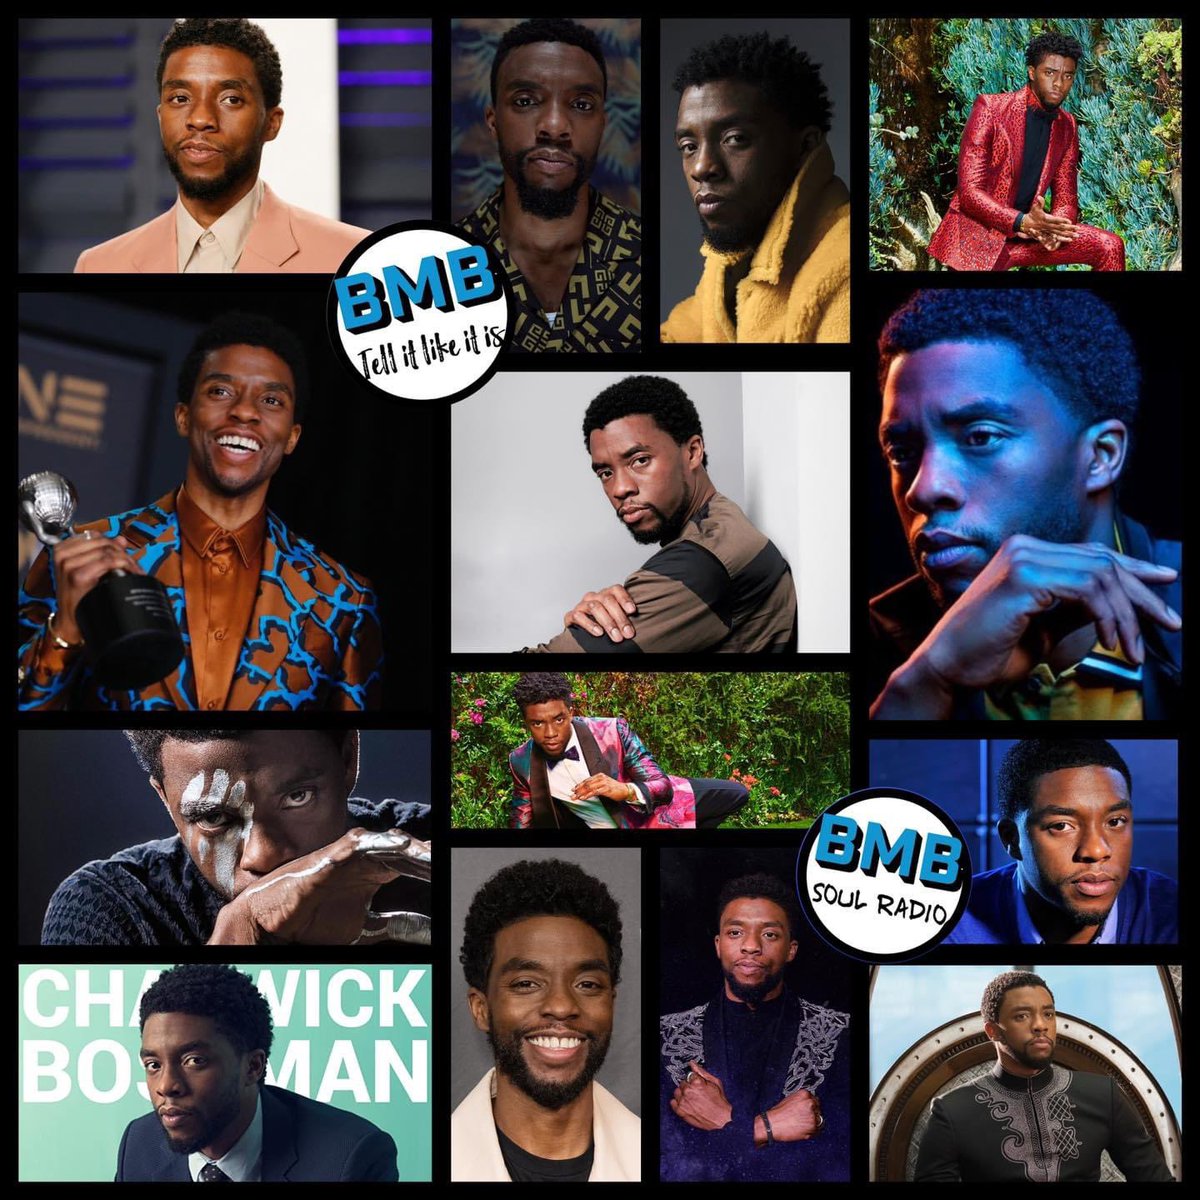 YOU ARE MISSED 🕊️🙏🏾
👑🕊️🙏🏾🎉🎁🎂🥳  Gone But Never Forgotten! Today We Remember Chadwick Boseman On His Birthday! #HappyBirthday #ChadwickBoseman #BlackPanther #CaptainAmericaCivilWar #AvengersInfinityWar #GetOnUp #JackieRobinson42 #TheExpress